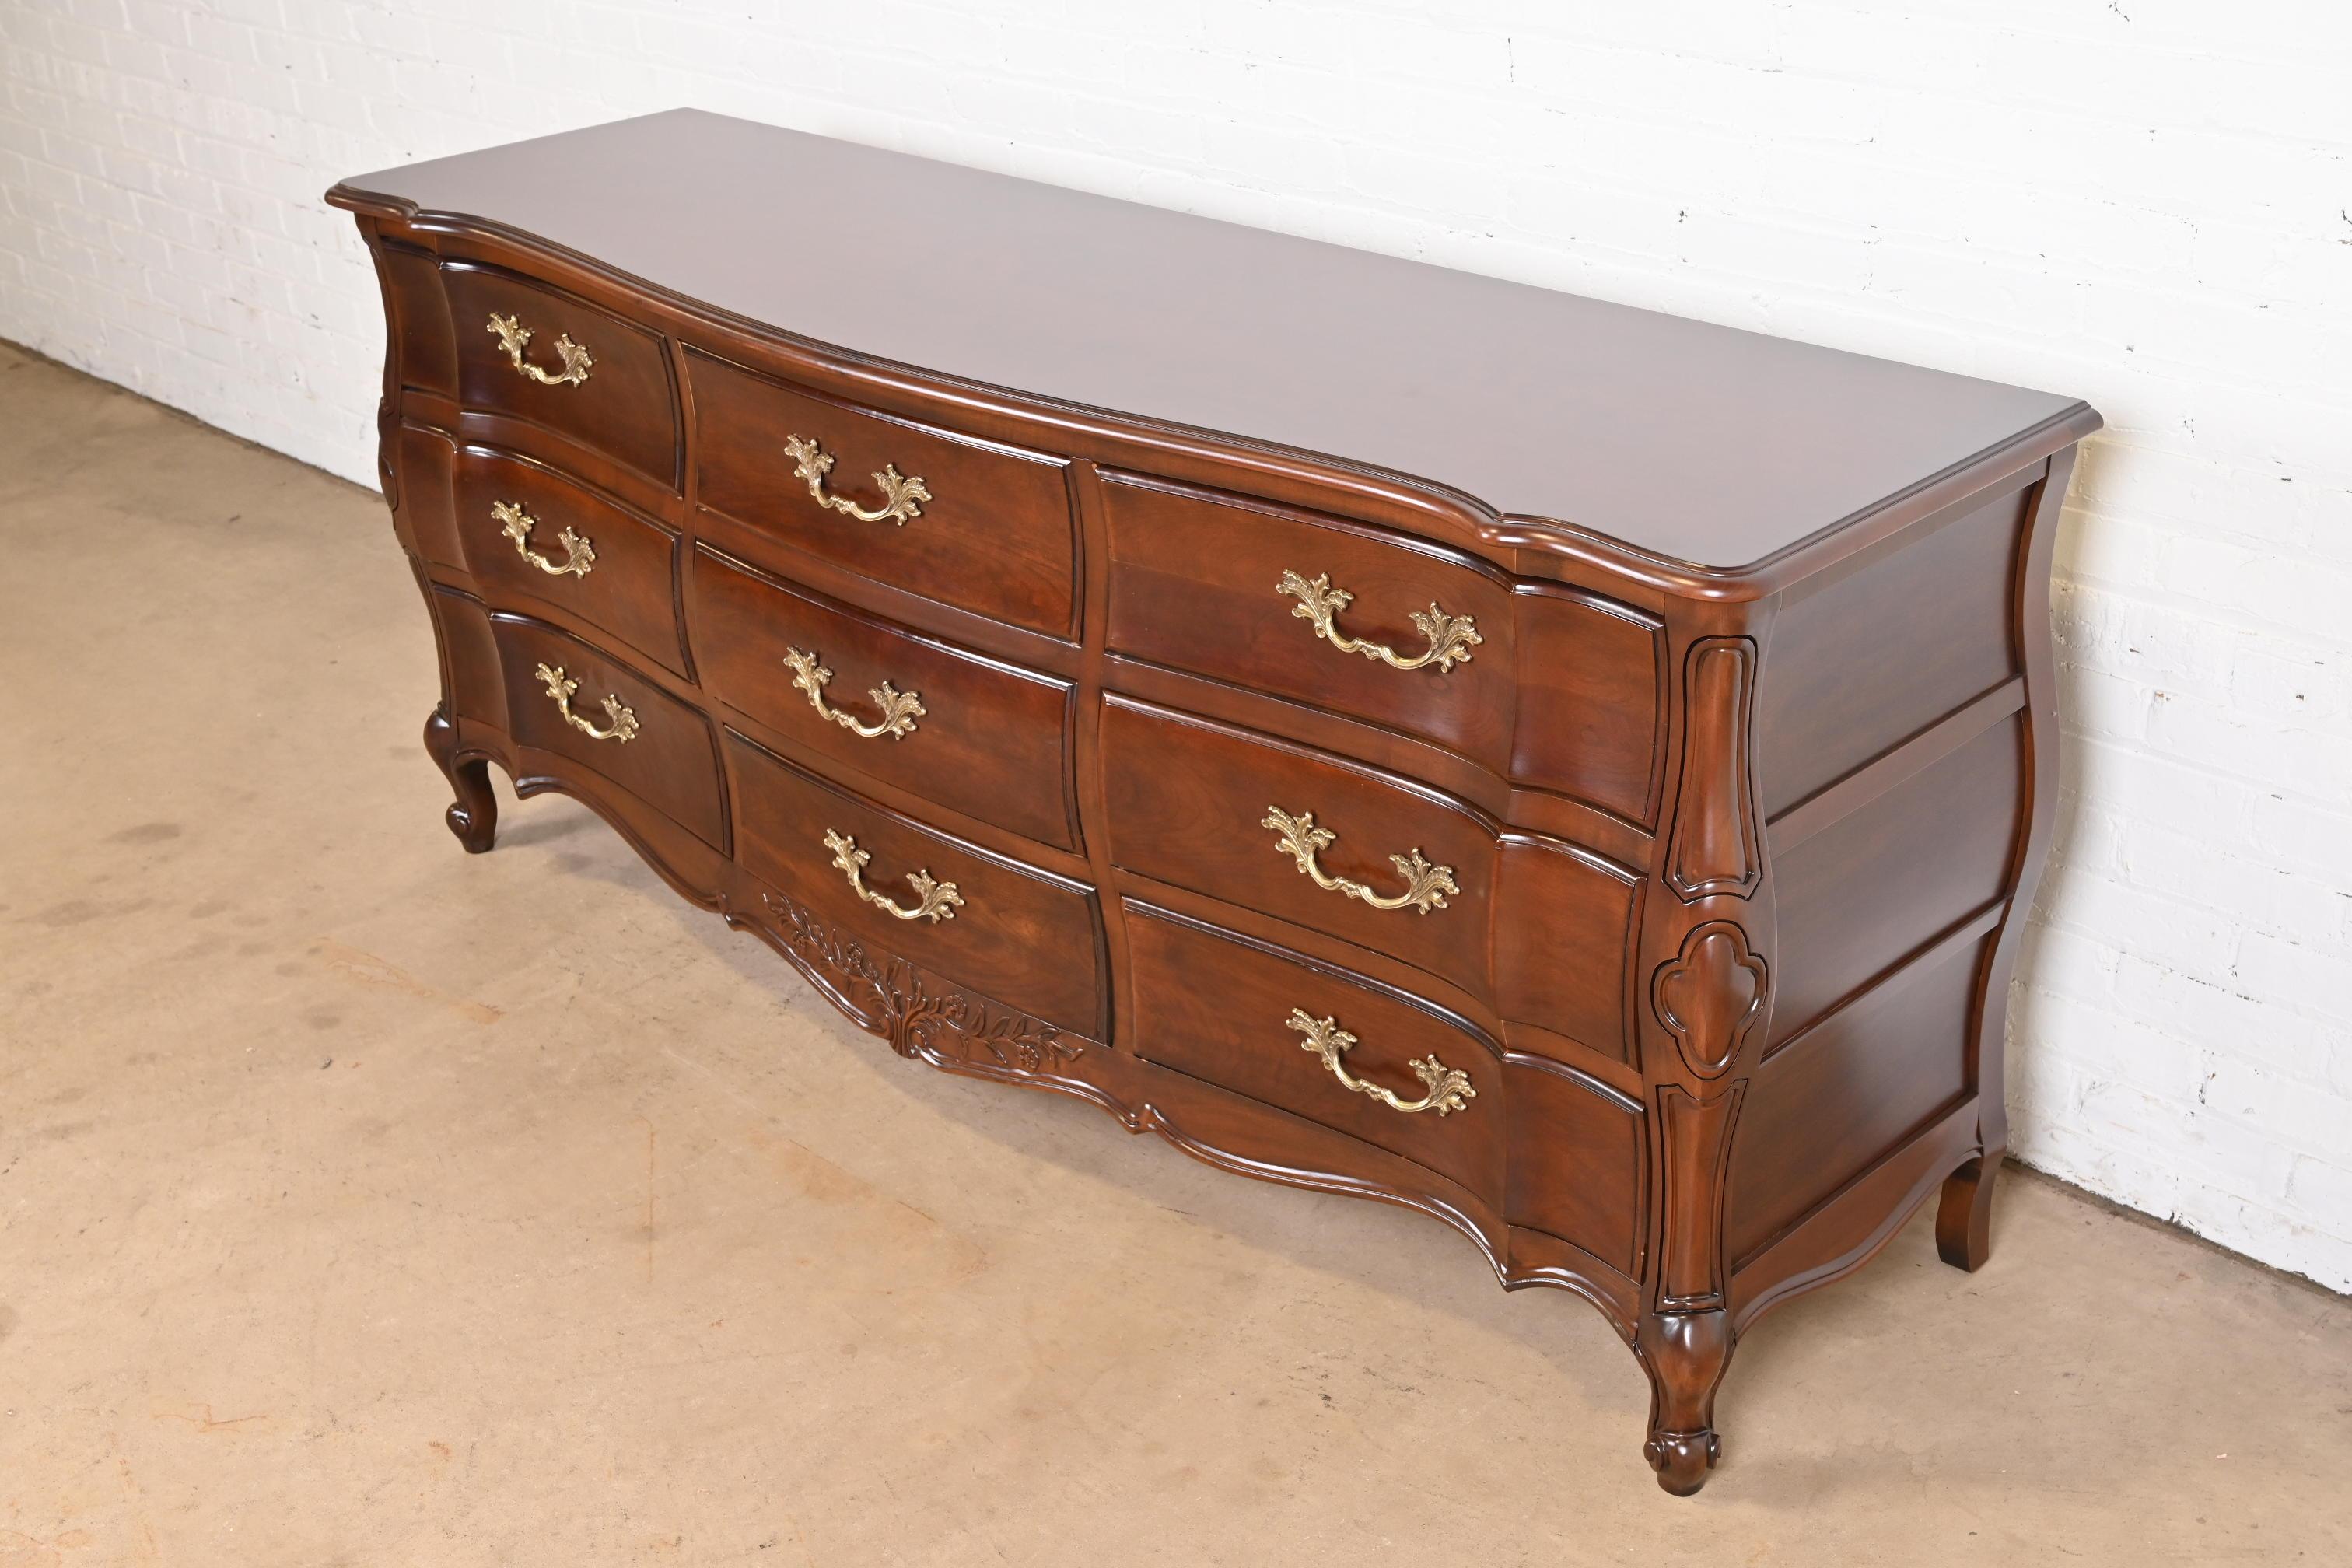 refinished french provincial furniture